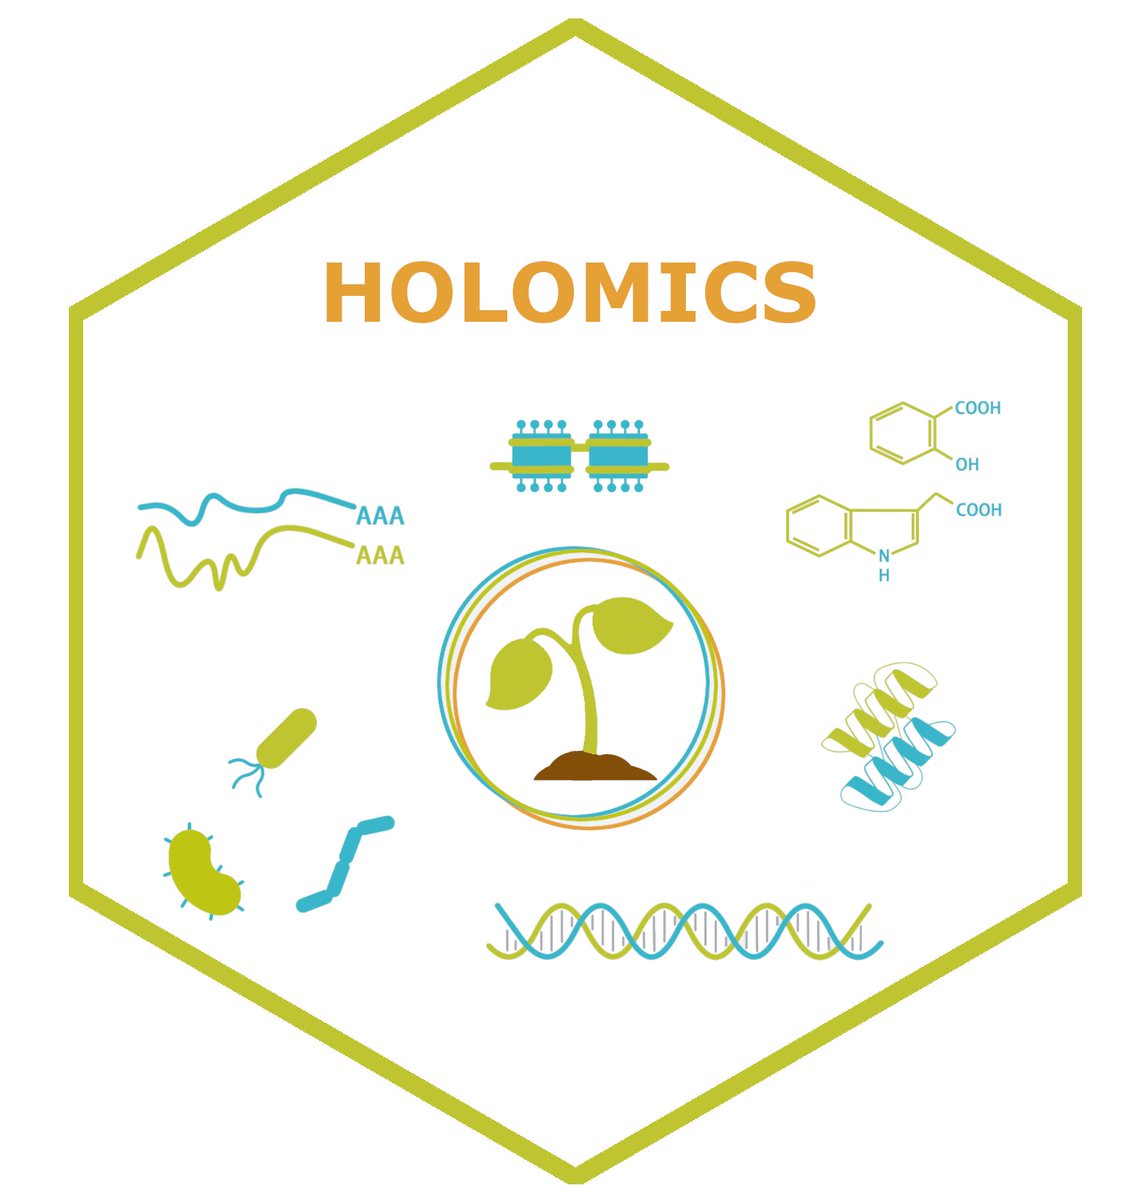 Package release alert! ✨Our package for the amazing R shiny app HOLOMICS has just been released! ✨ Holomics offers a user-friendly platform for #multiomics analysis. Kudos to the main developer, Katharina Munk! 👏 cran.r-project.org/web/packages/H…

#rshiny #shinyapp #bioinformatics